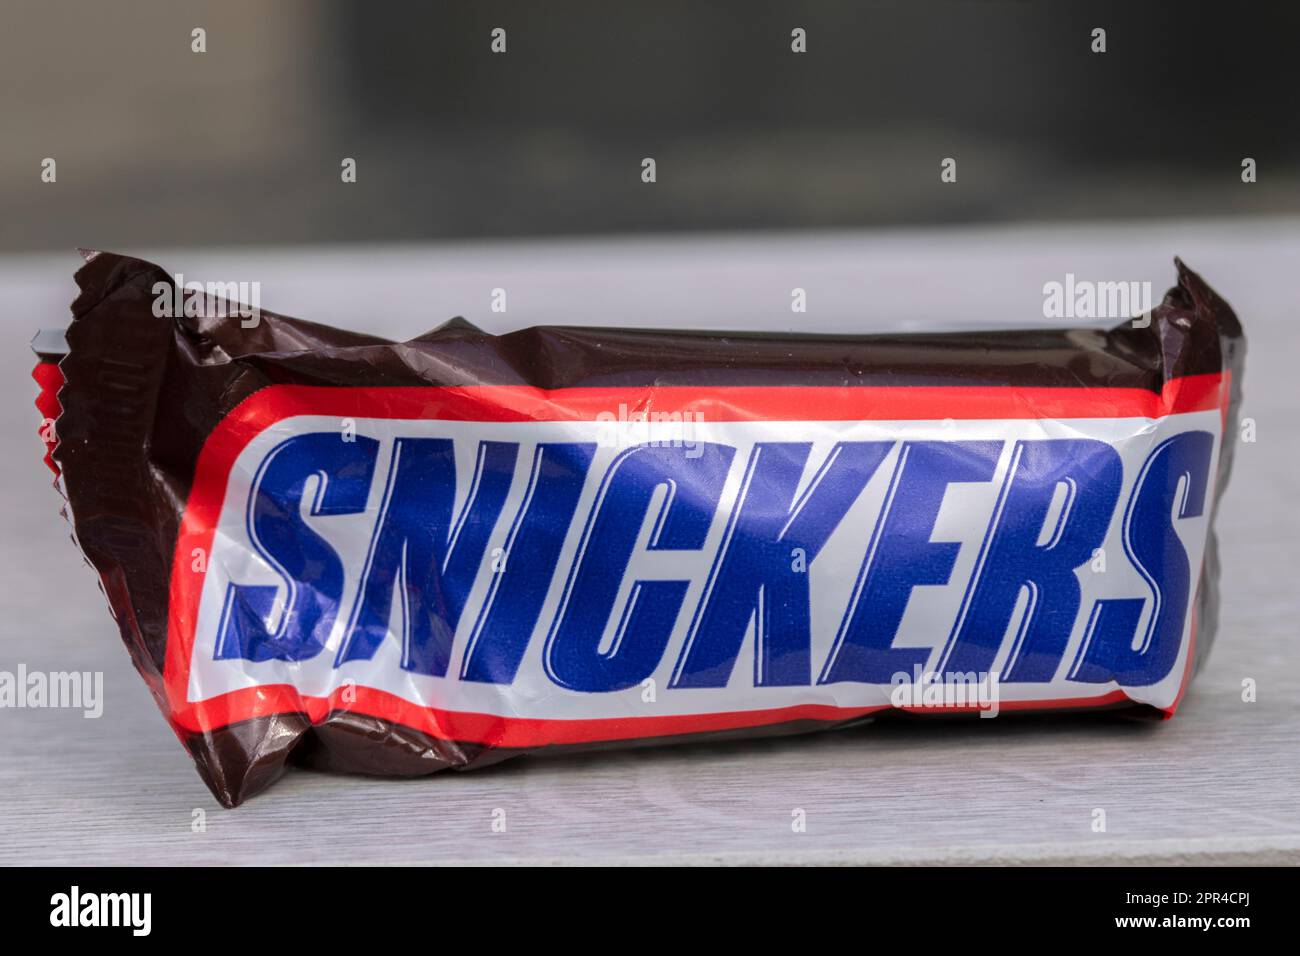 A single Fun Size Snickers candy bar isolated on white Stock Photo - Alamy